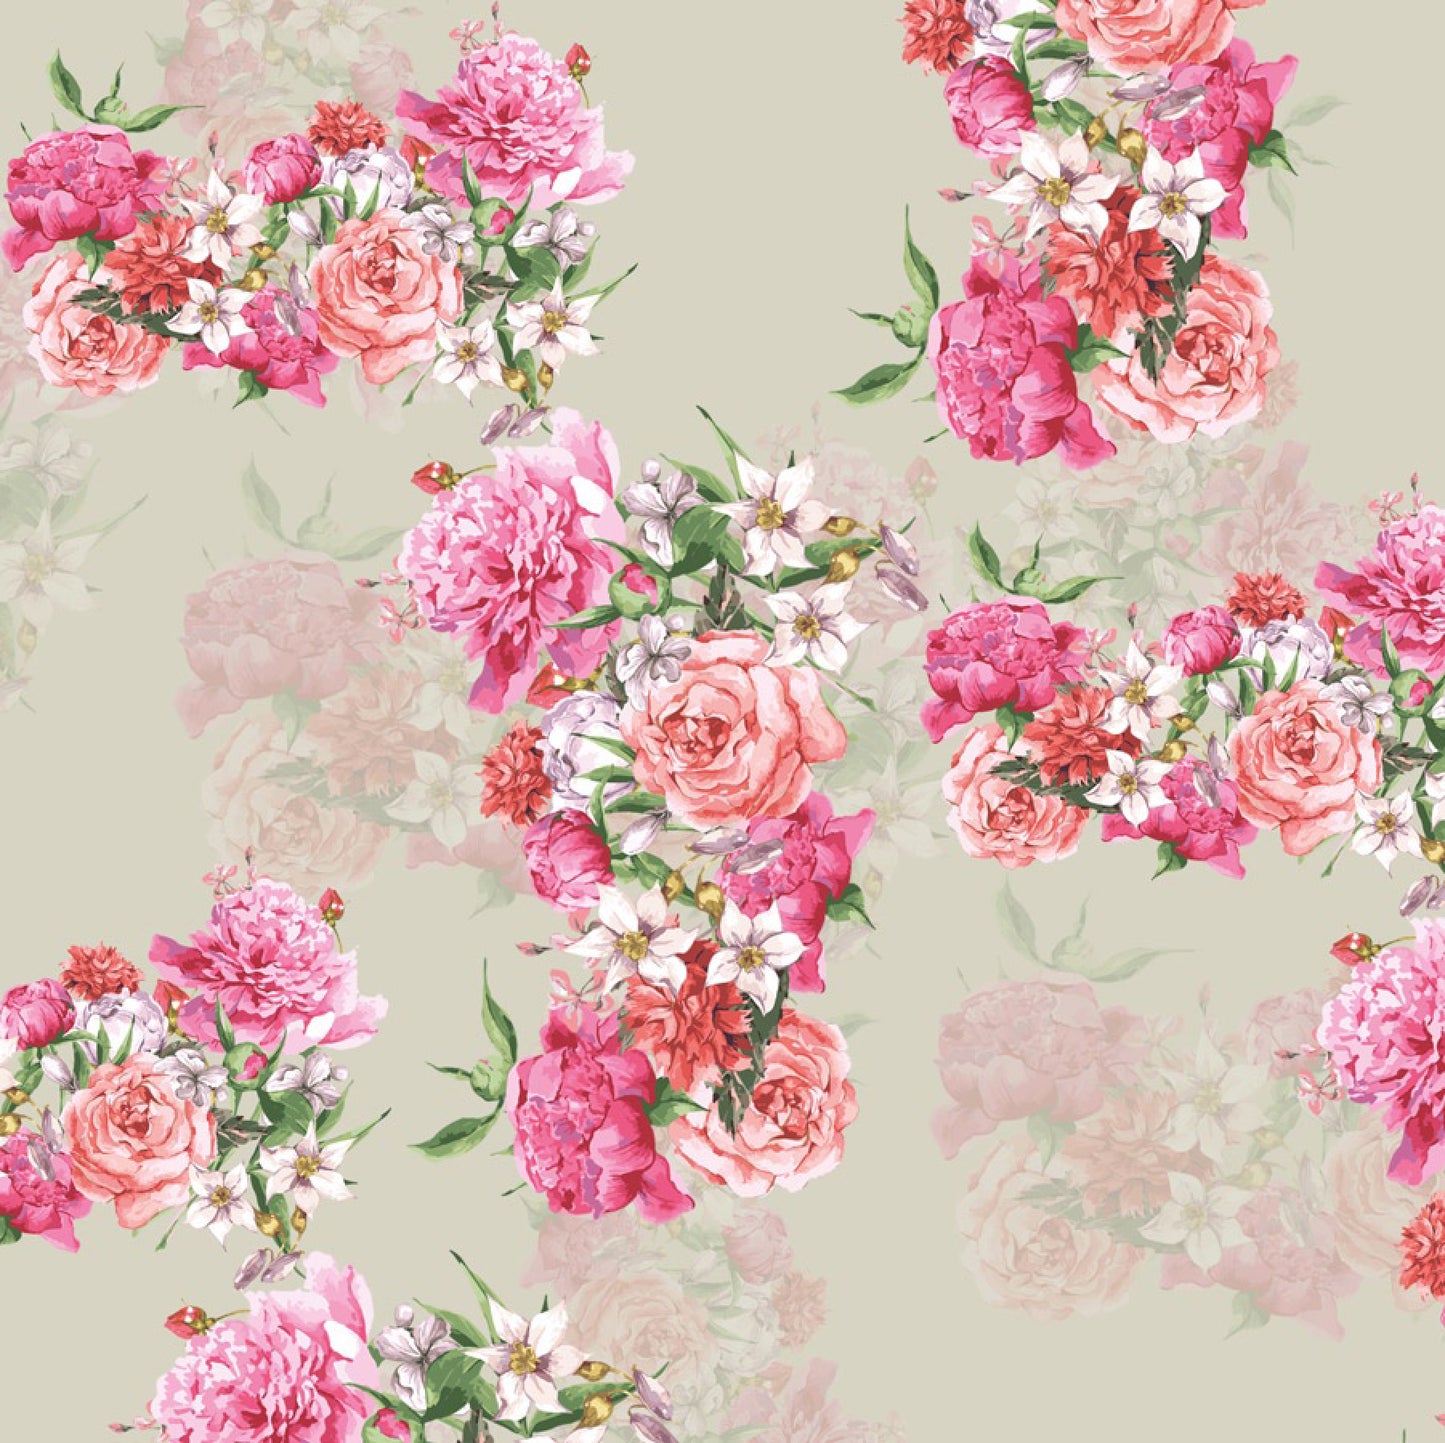 Colorful Floral Design 38 Ready To Print - TradeUNO